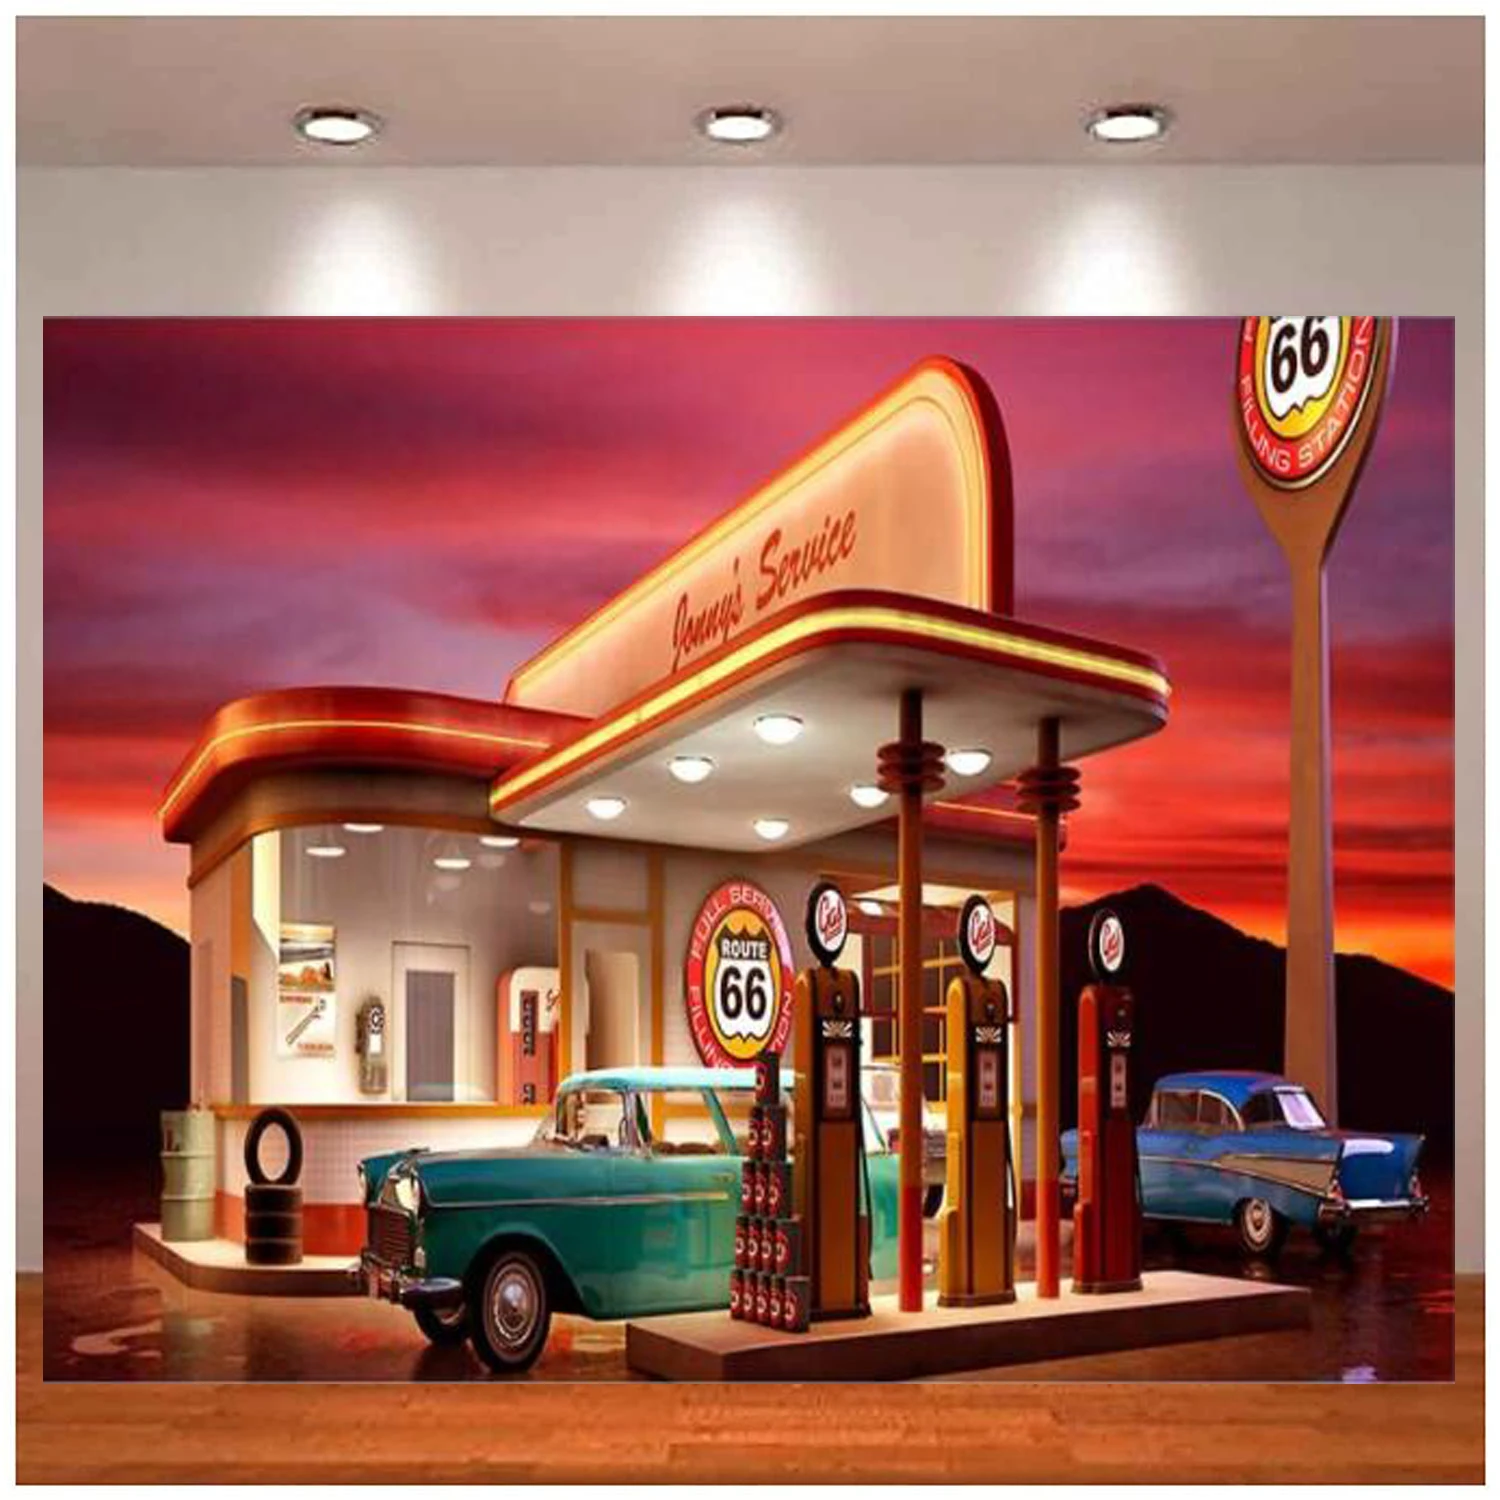 

50s Photography Backdrop Route 66 Gas Station Vintage Car Background Photo Shooting Studio Props Party Decor Banner Poster